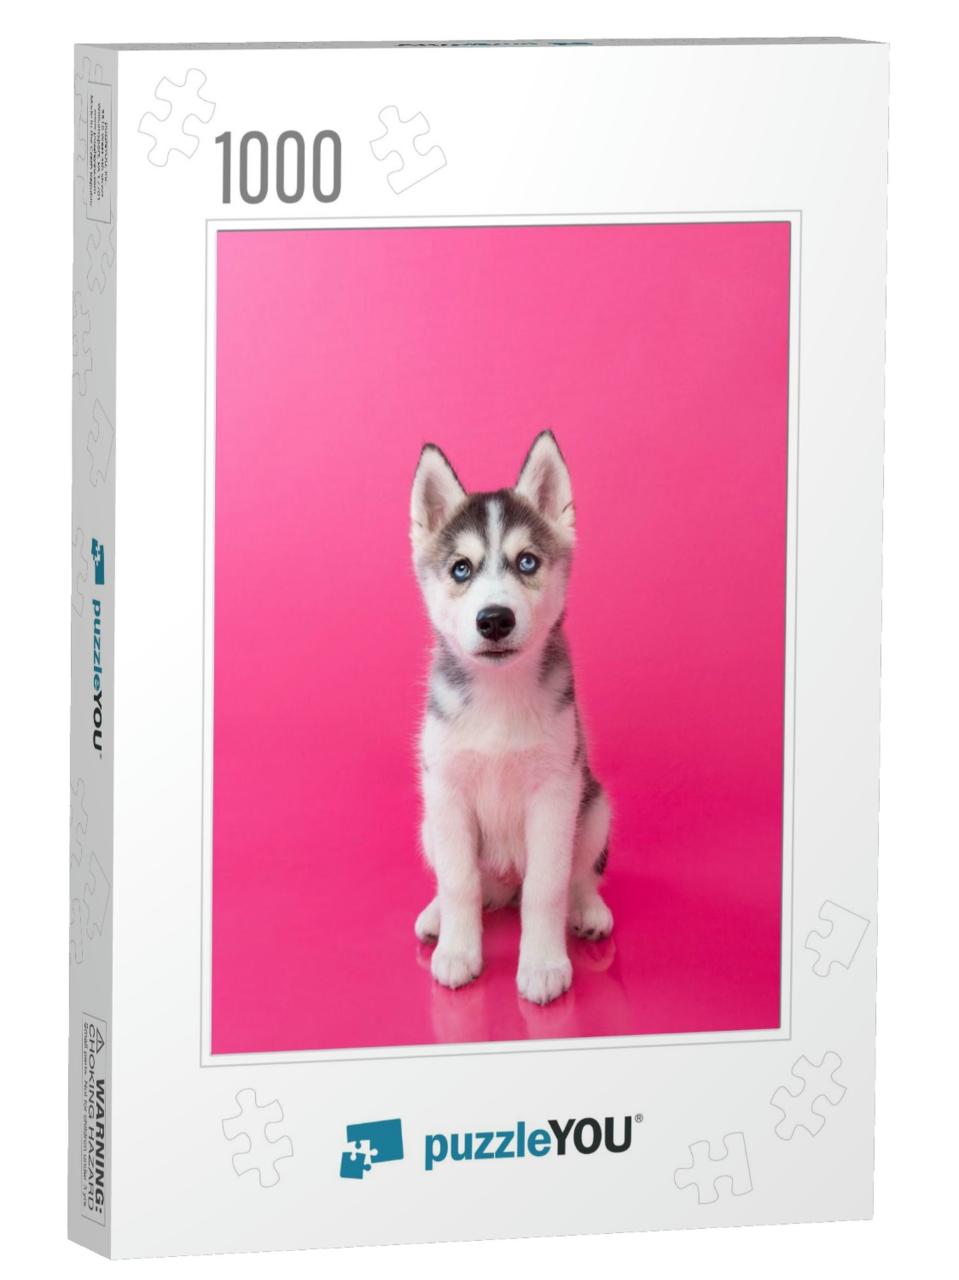 Siberian Husky Puppy Sitting with Pink Background... Jigsaw Puzzle with 1000 pieces